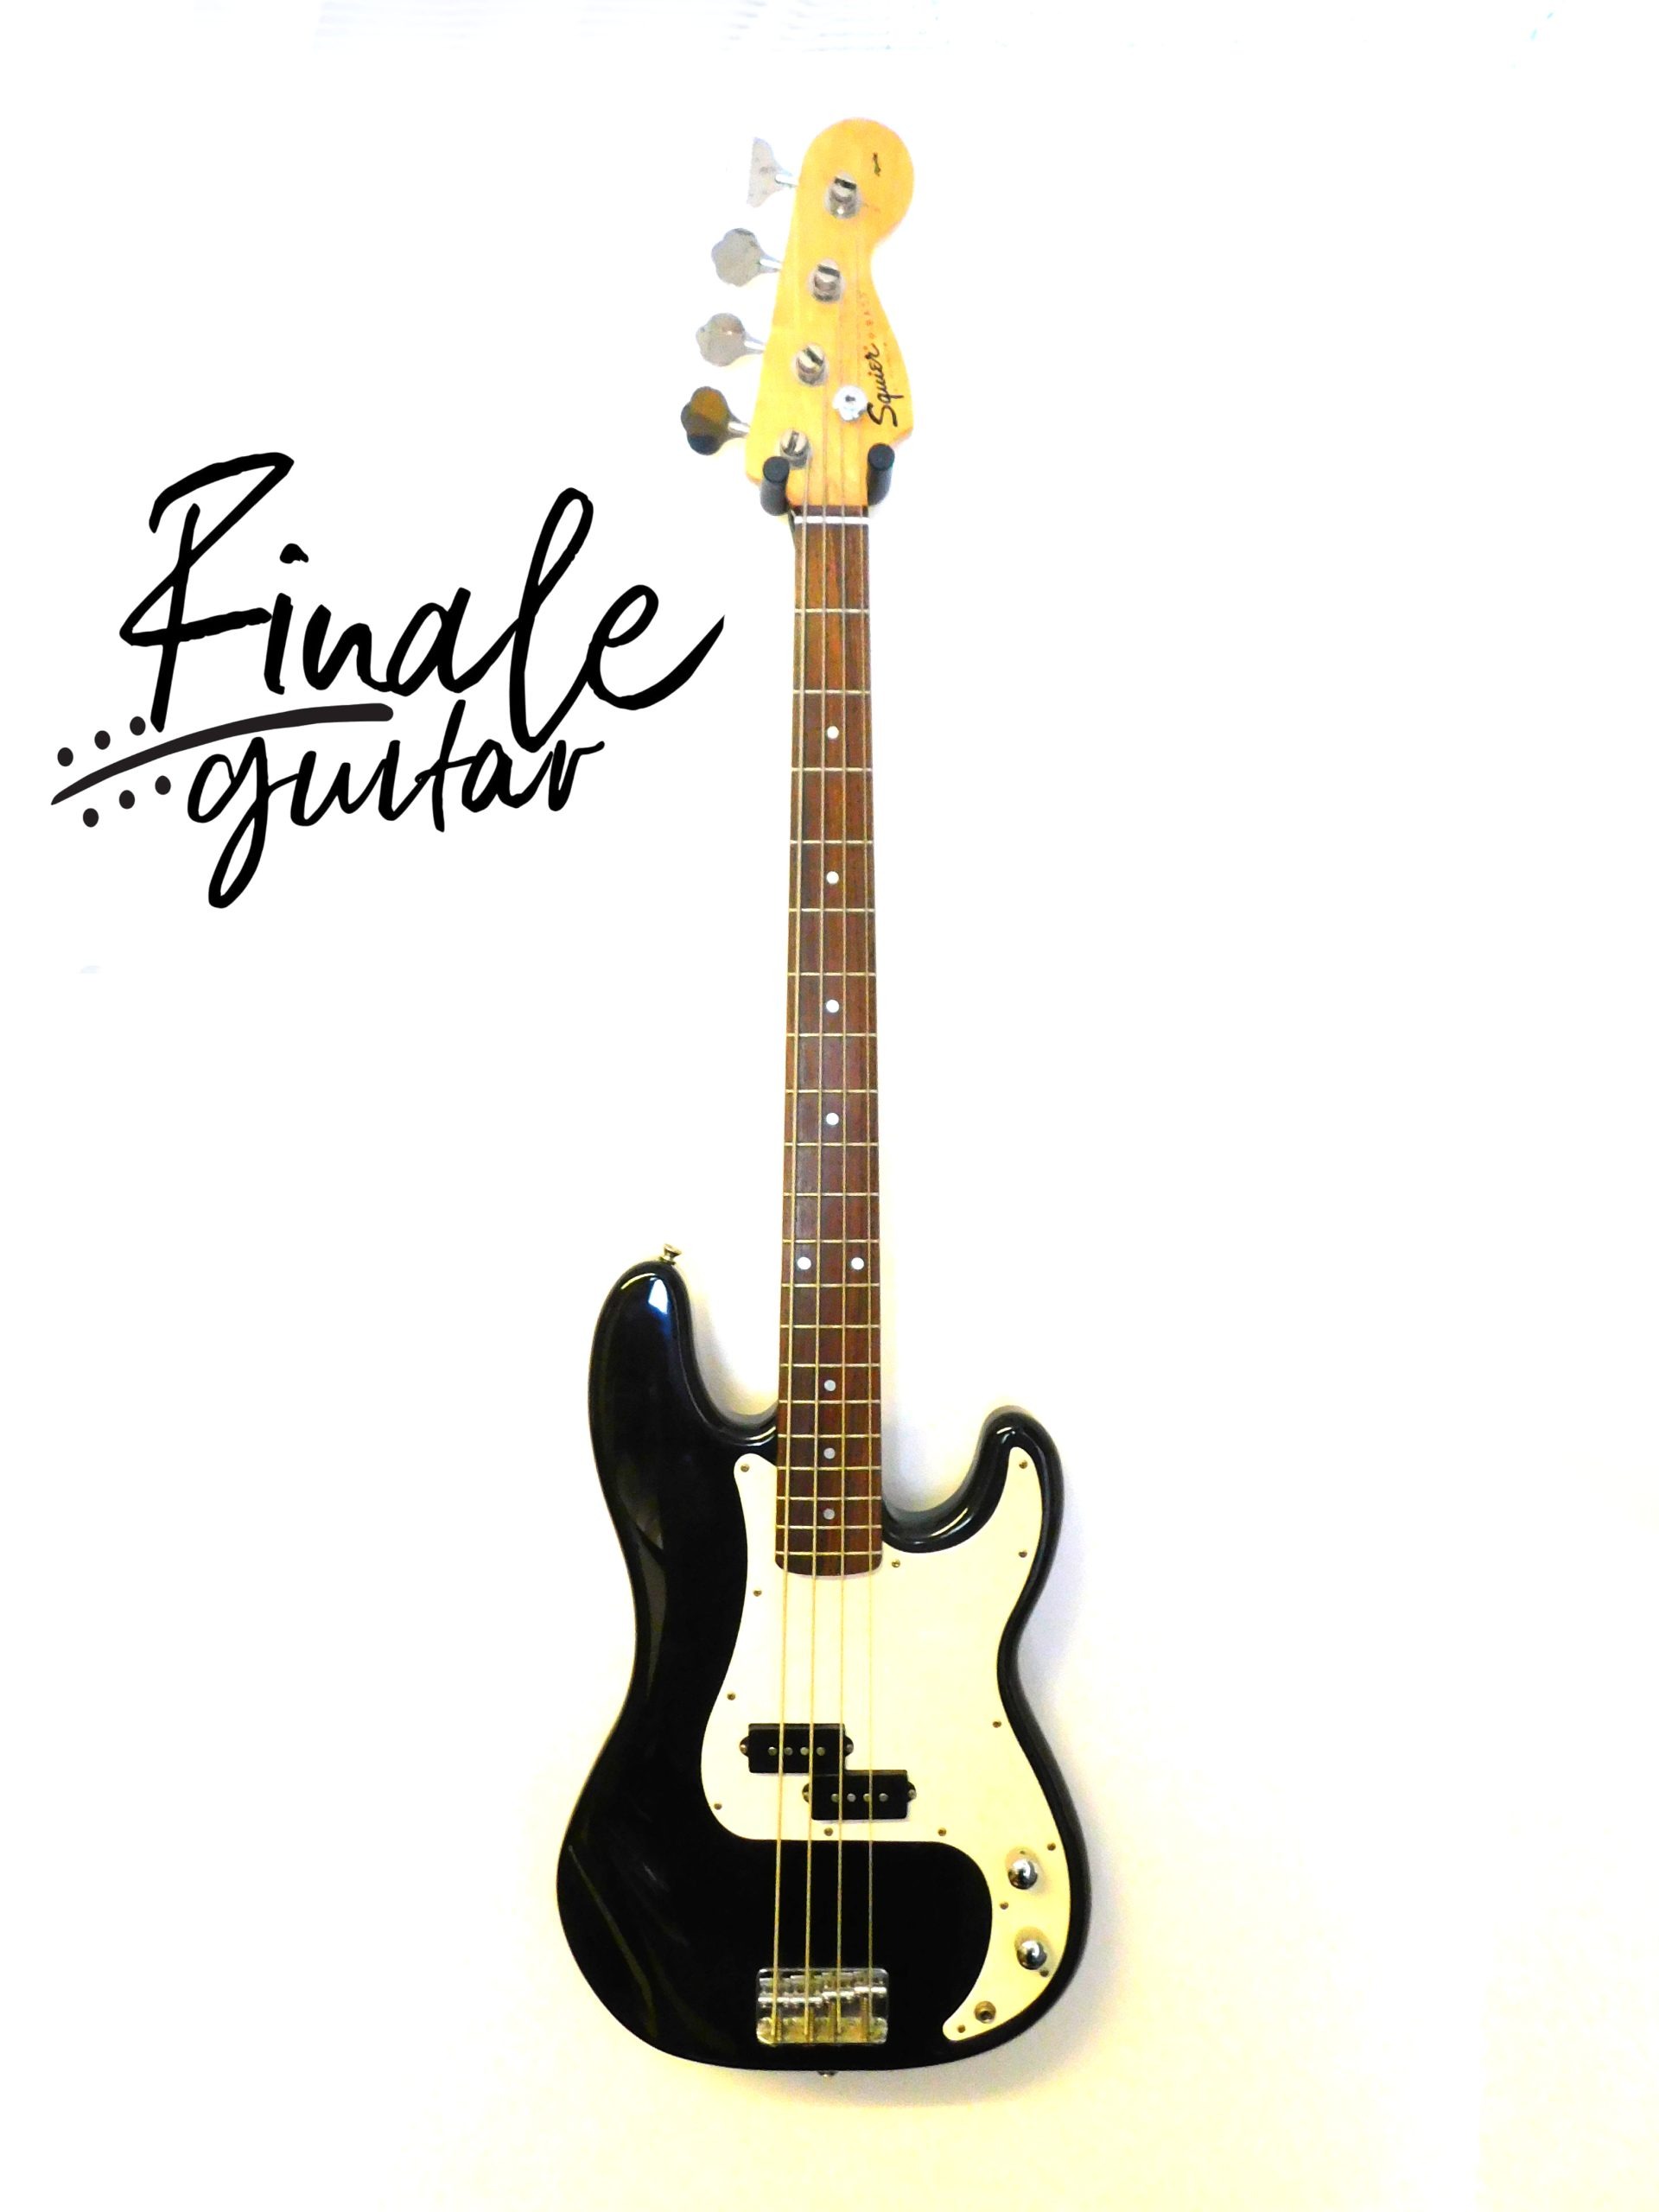 Squier Affinity Precision Bass (Yako factory, Taiwan, 1997) for sale in our Sheffield guitar shop, Finale Guitar